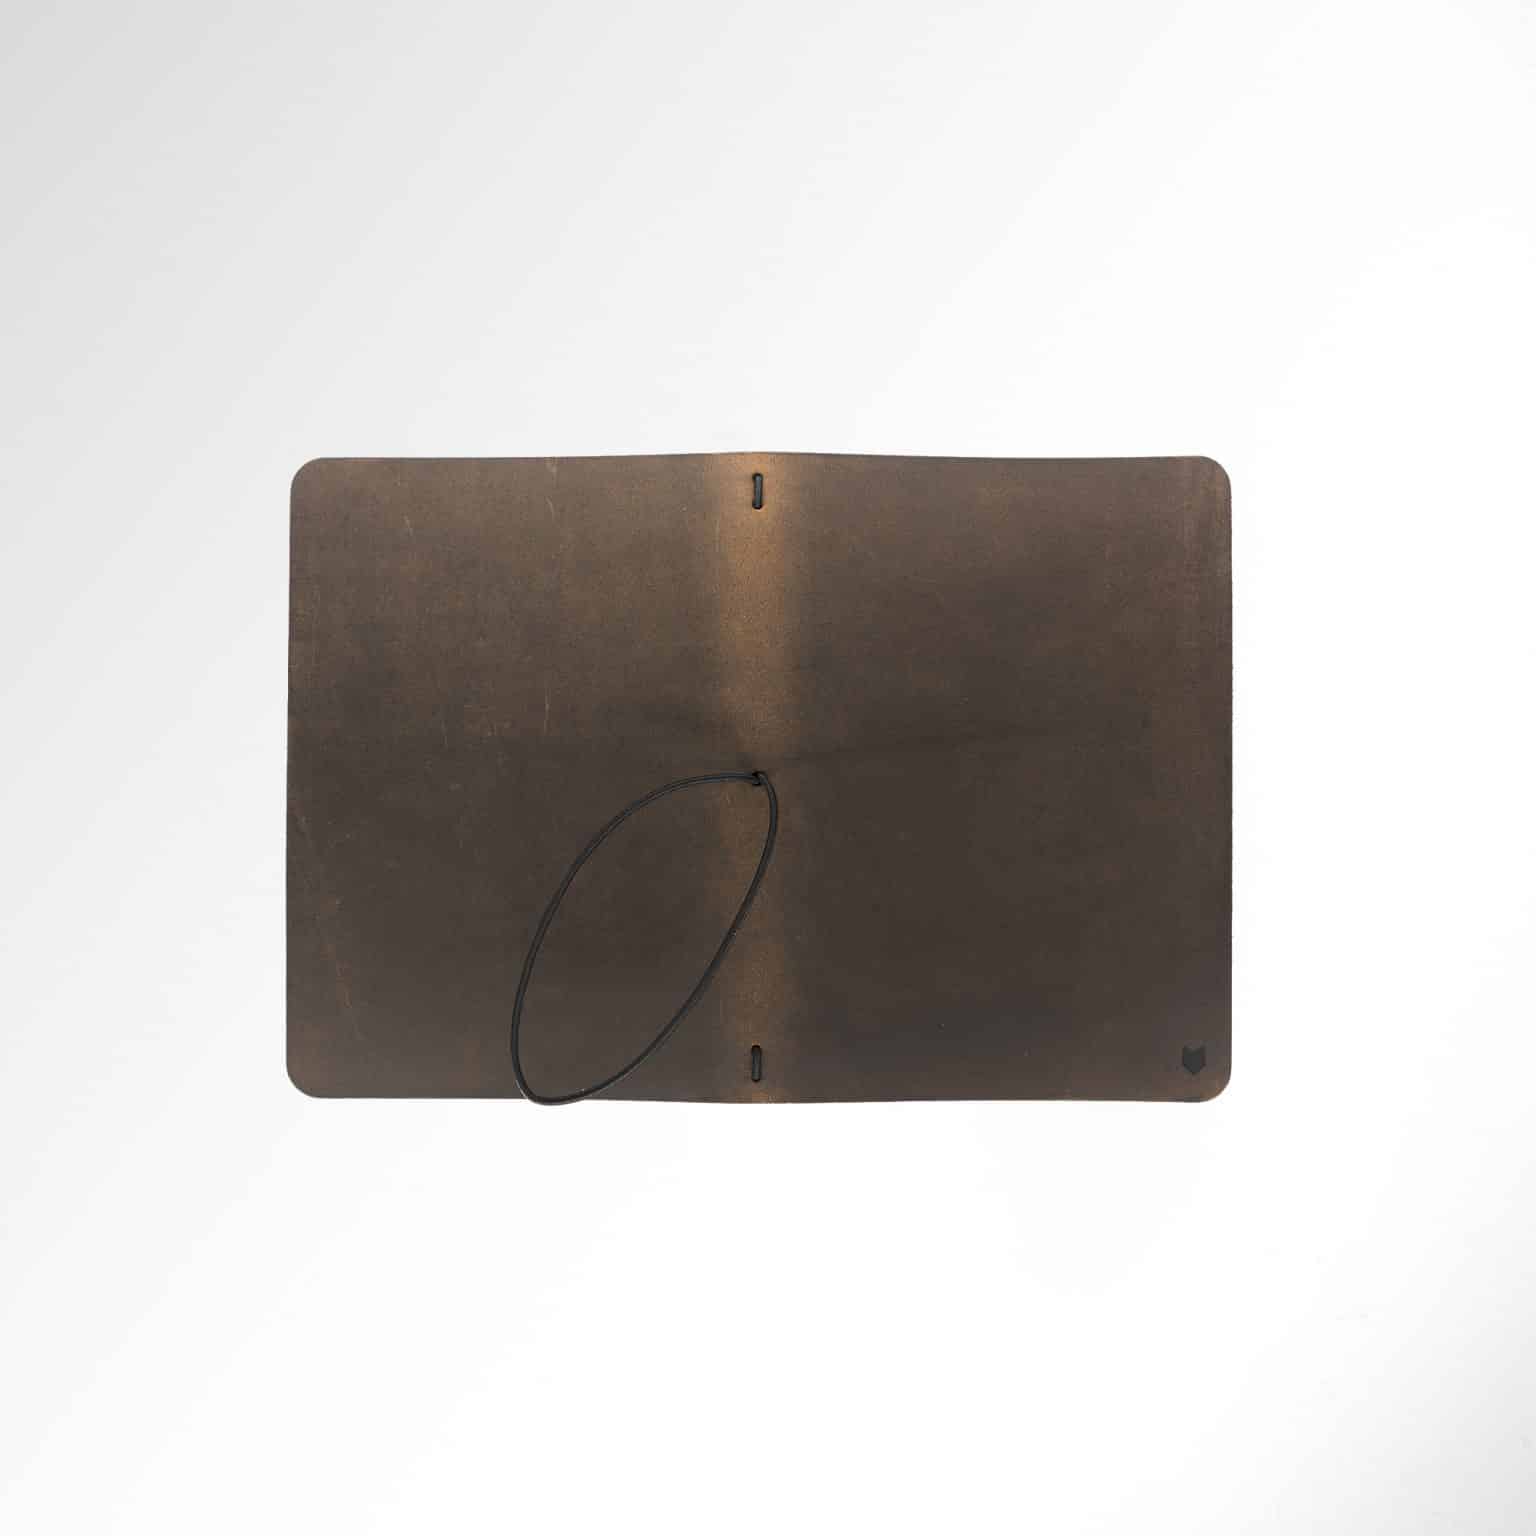 Ultra-slim leather wallet with smooth finish